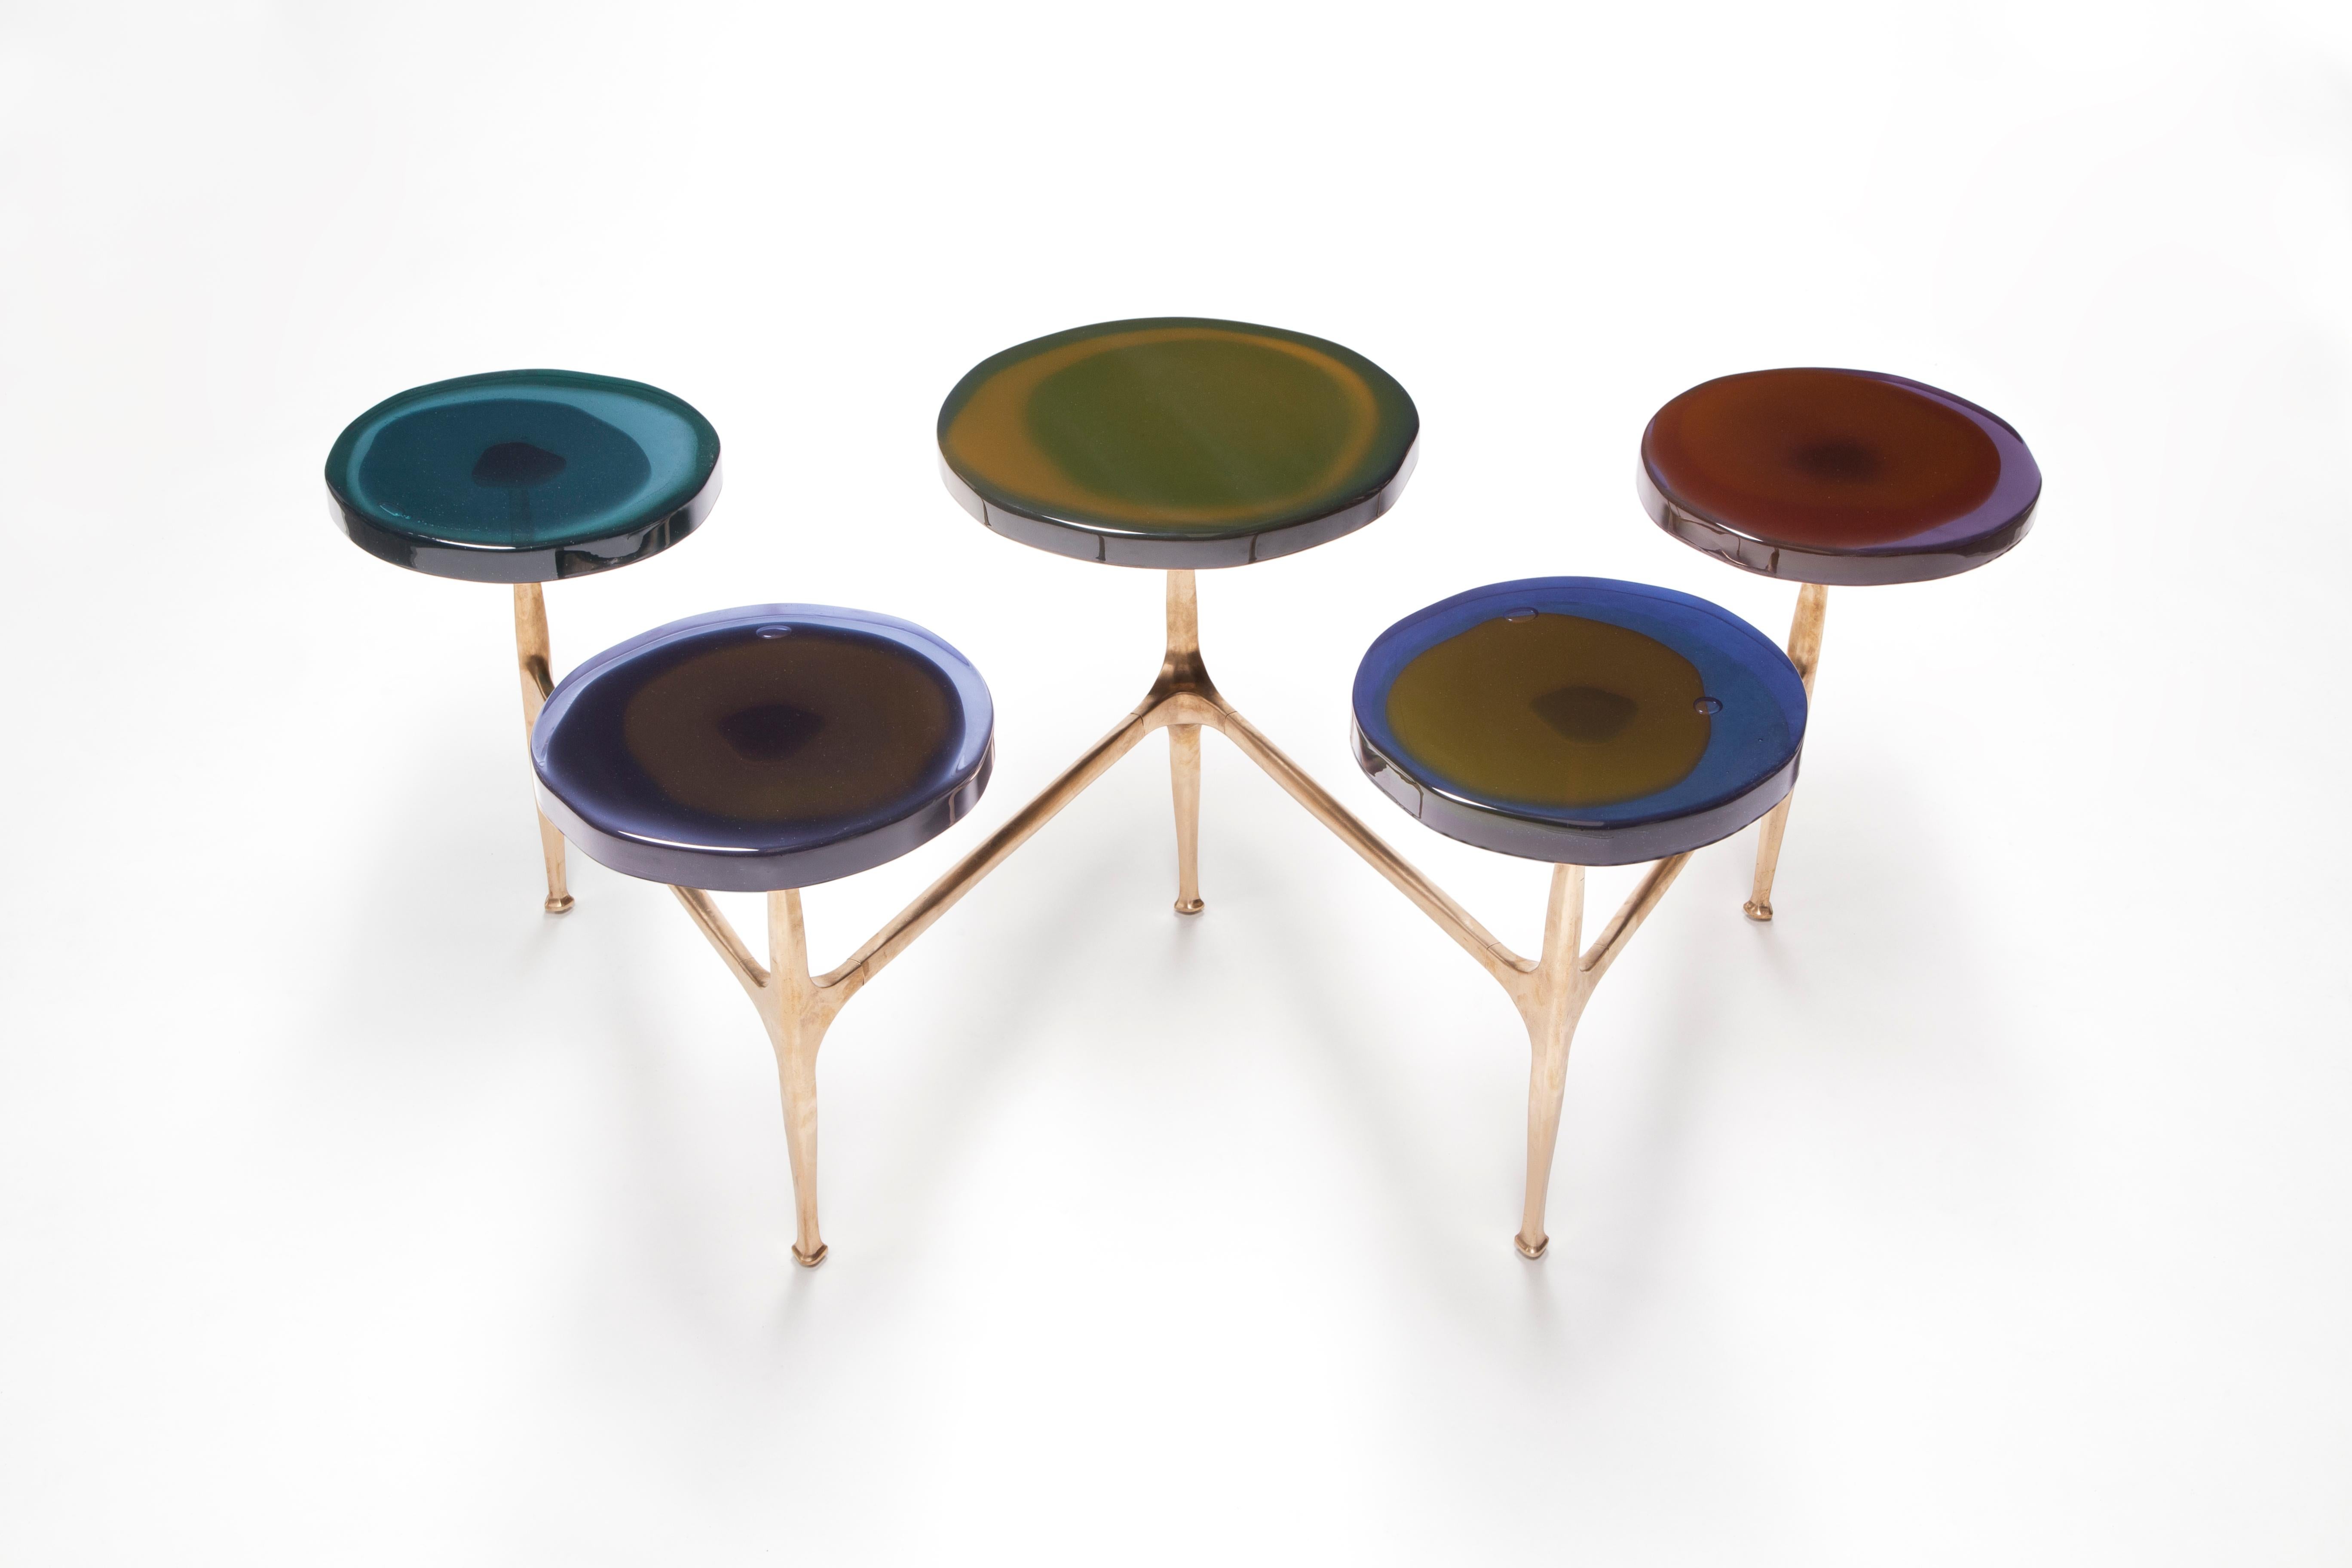 Agatha coffee table by Draga & Aurel
Dimensions: W 121 x D 80 x H 50 cm
 Top Ø 32/40 cm
Materials: Resin, bronze

The Agatha coffee tables are featured by irregular circular tops of transparent and
colorful resin sit on a bronze frame with a